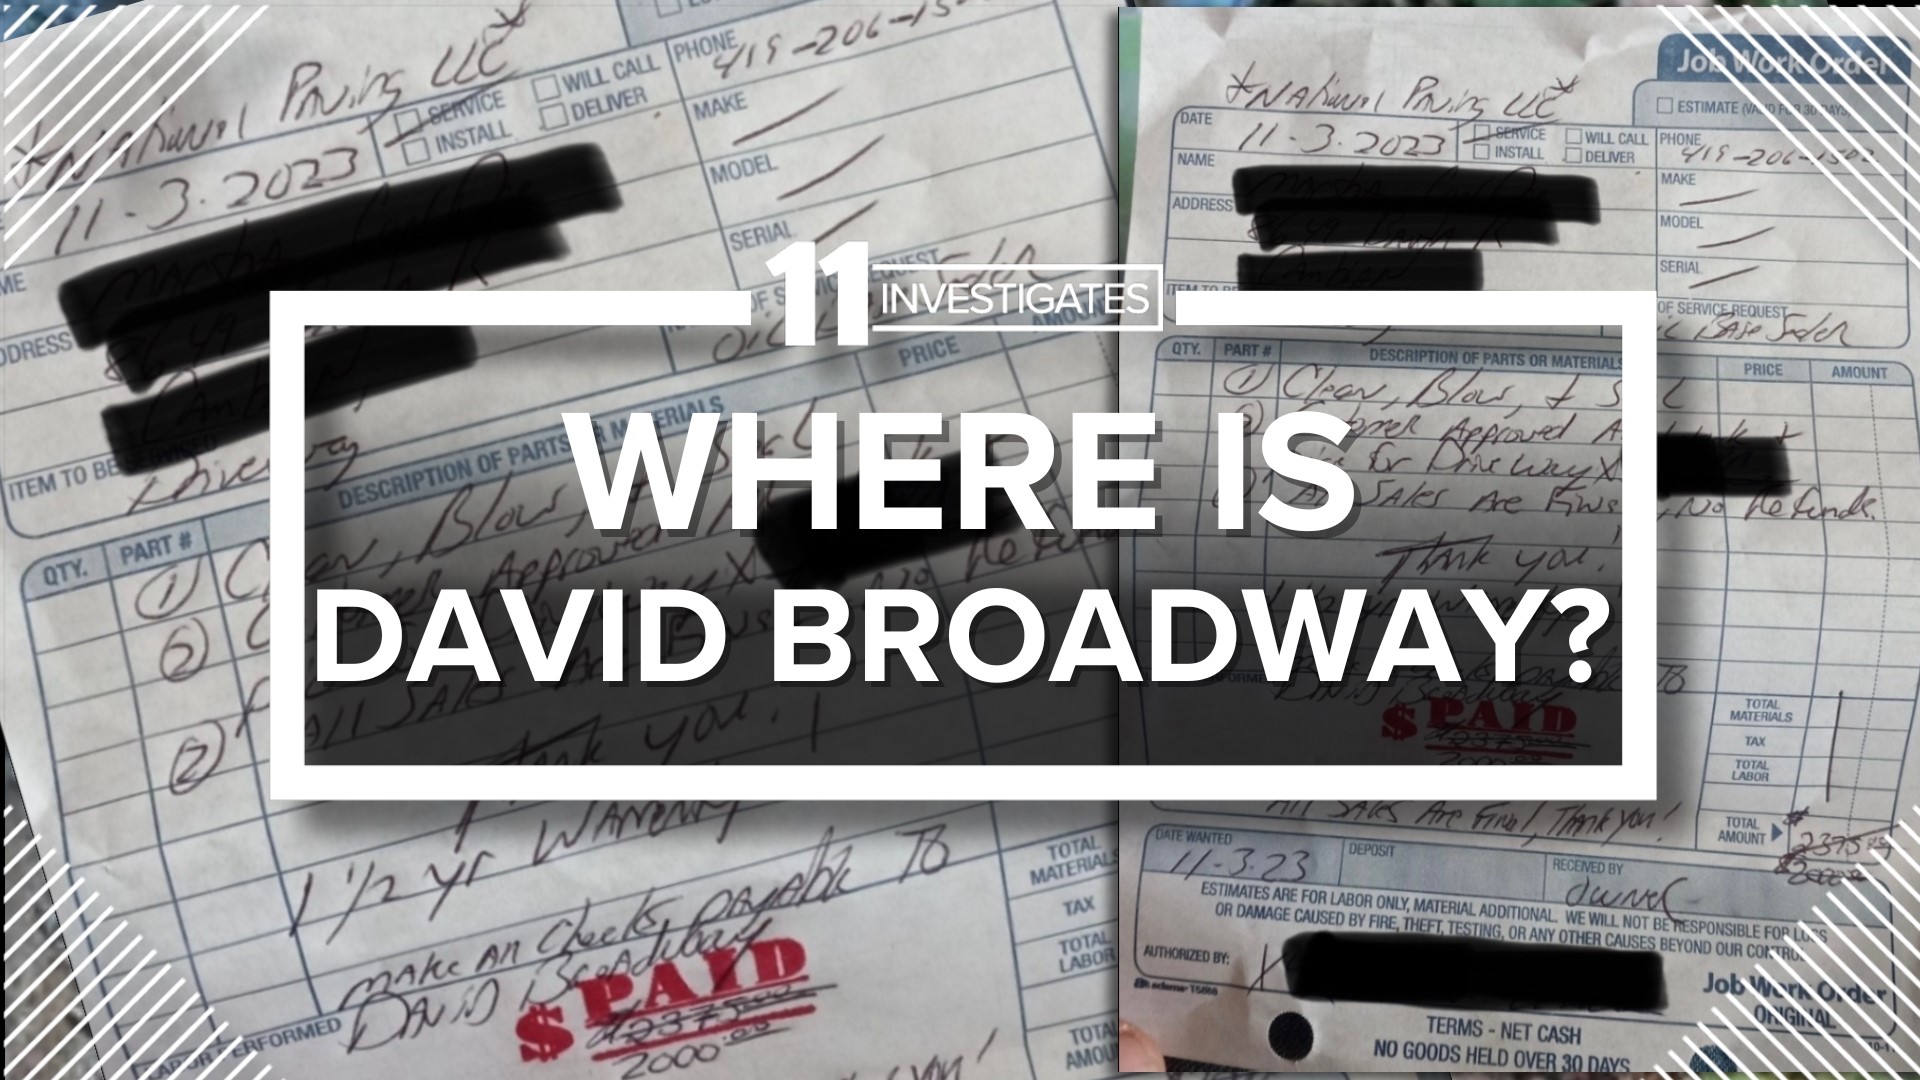 11 Investigates has brought you stories of contractor David Broadway, accused of scamming senior citizens, and now it seems he's found a new city to work in.